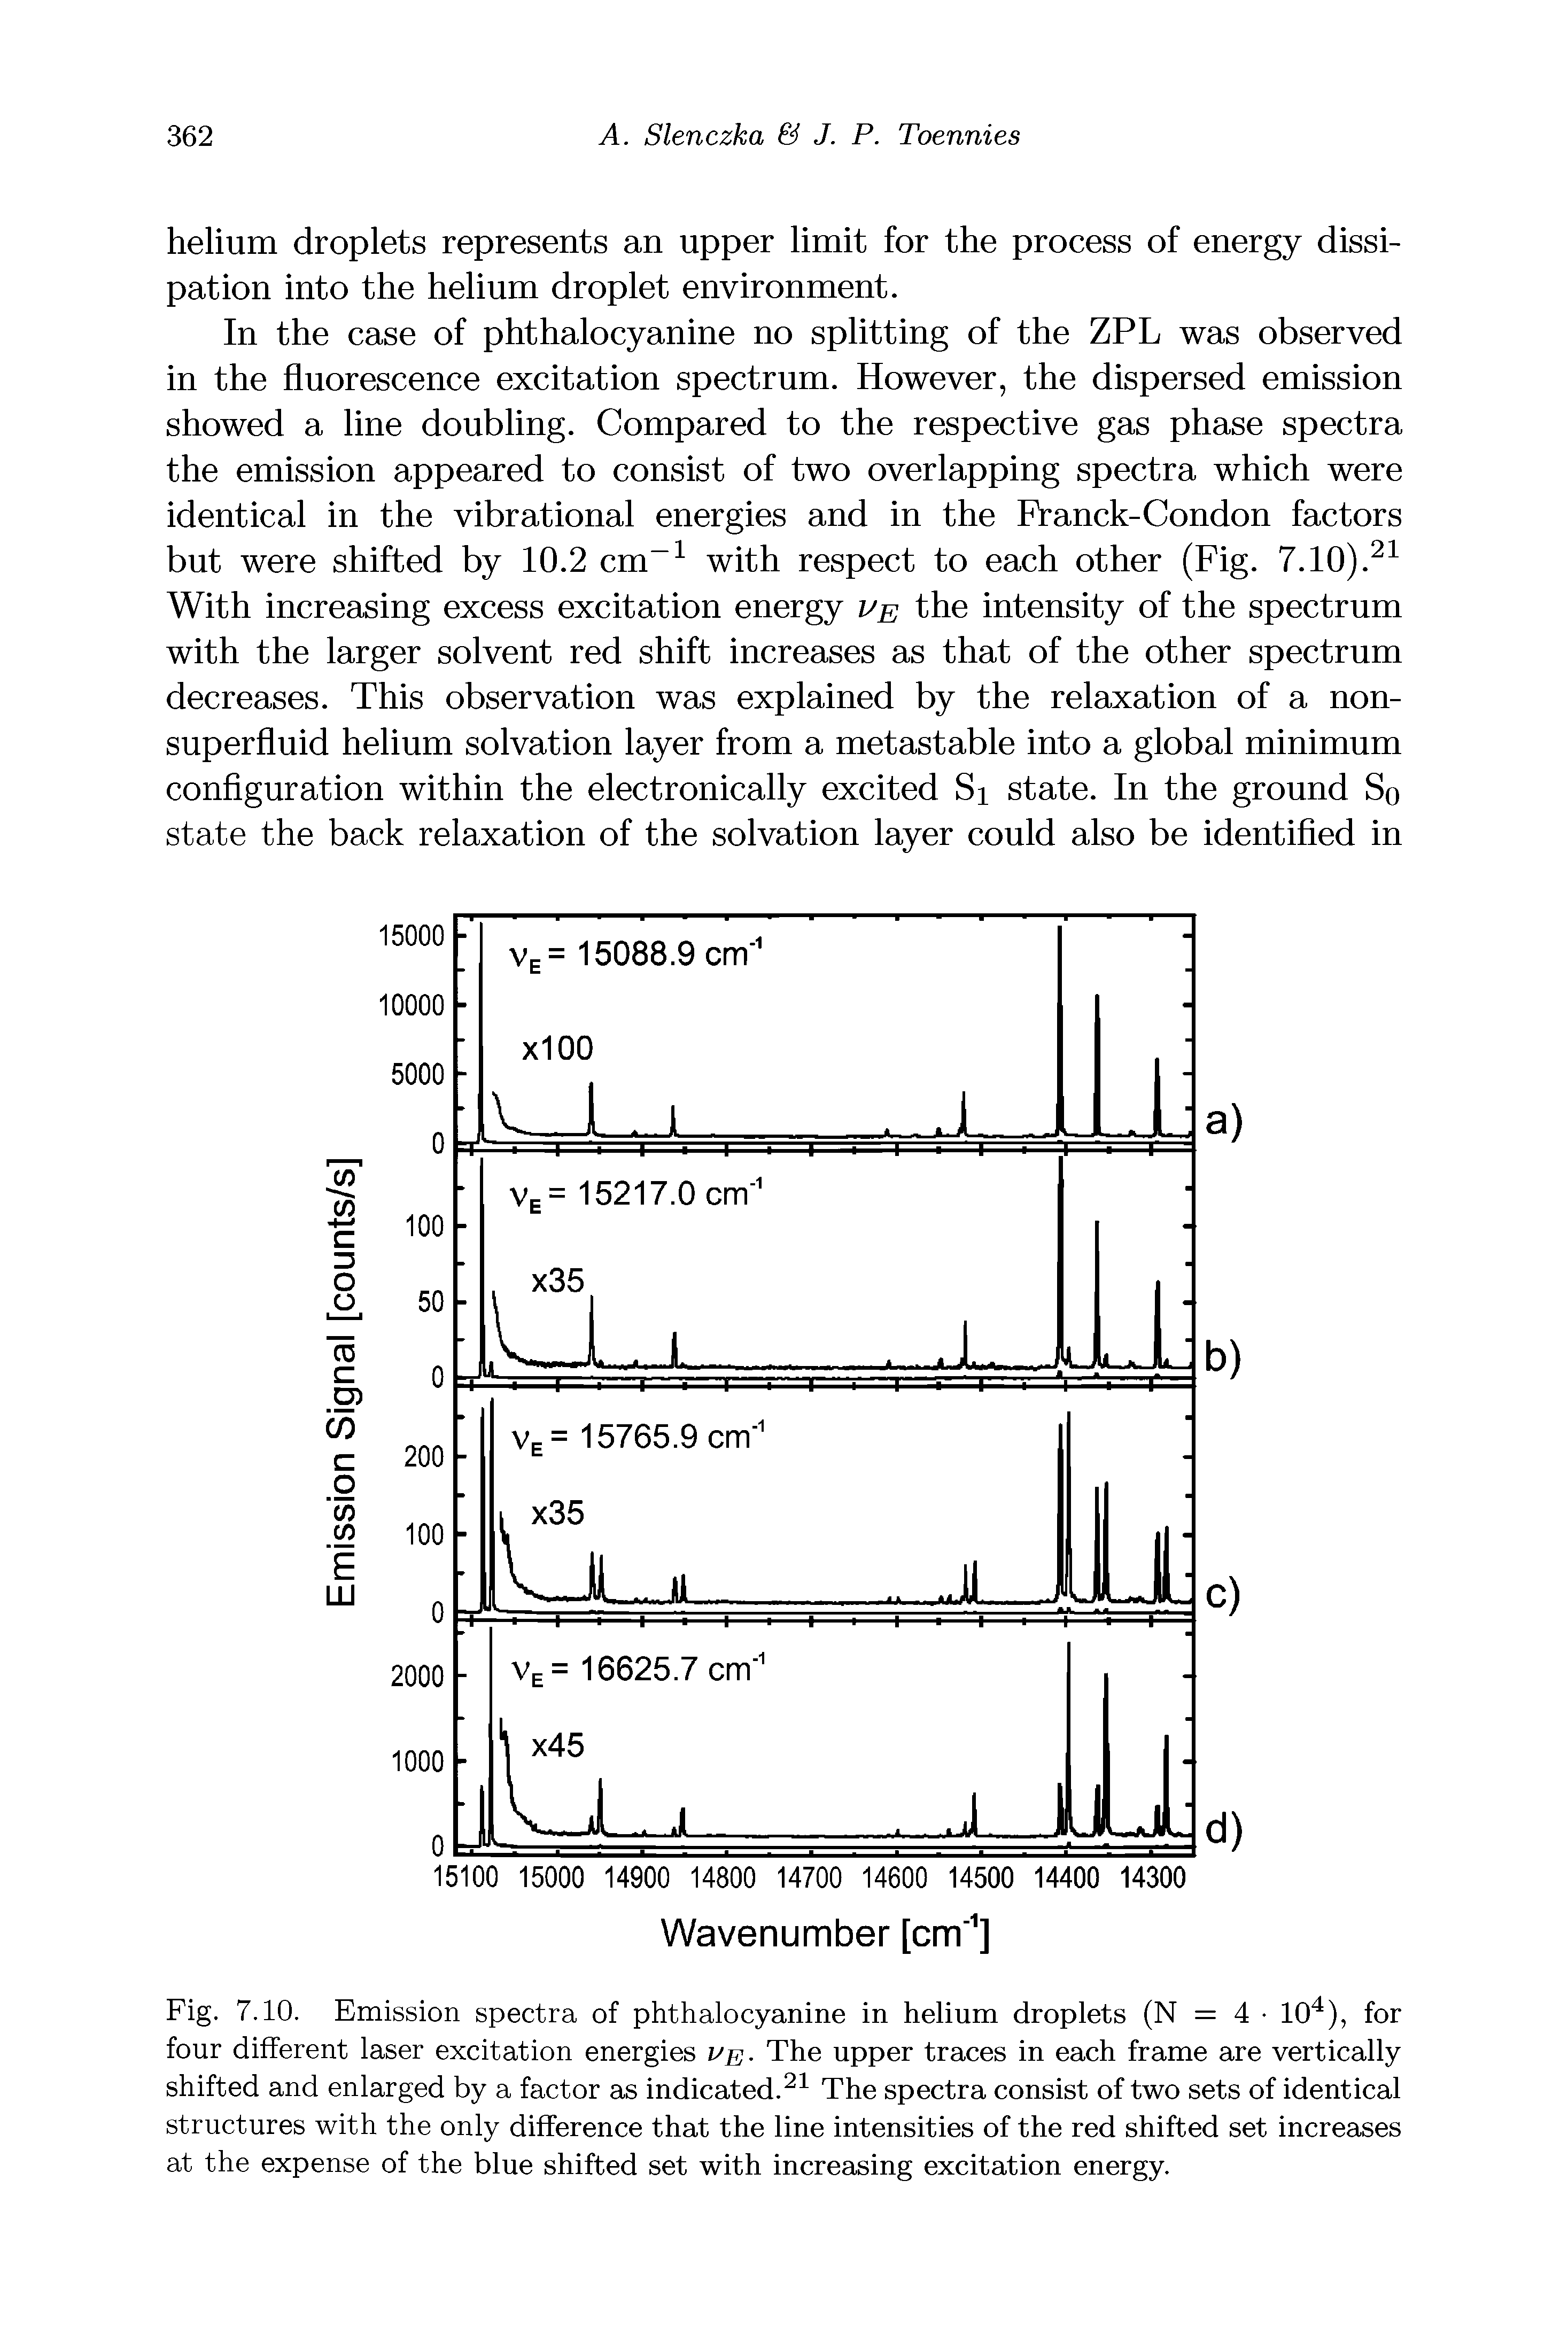 Fig. 7.10. Emission spectra of phthalocyanine in helium droplets (N = 4 10 ), for four different laser excitation energies ve- The upper traces in each frame are vertically shifted and enlarged by a factor as indicated.The spectra consist of two sets of identical structures with the only difference that the line intensities of the red shifted set increases at the expense of the blue shifted set with increasing excitation energy.